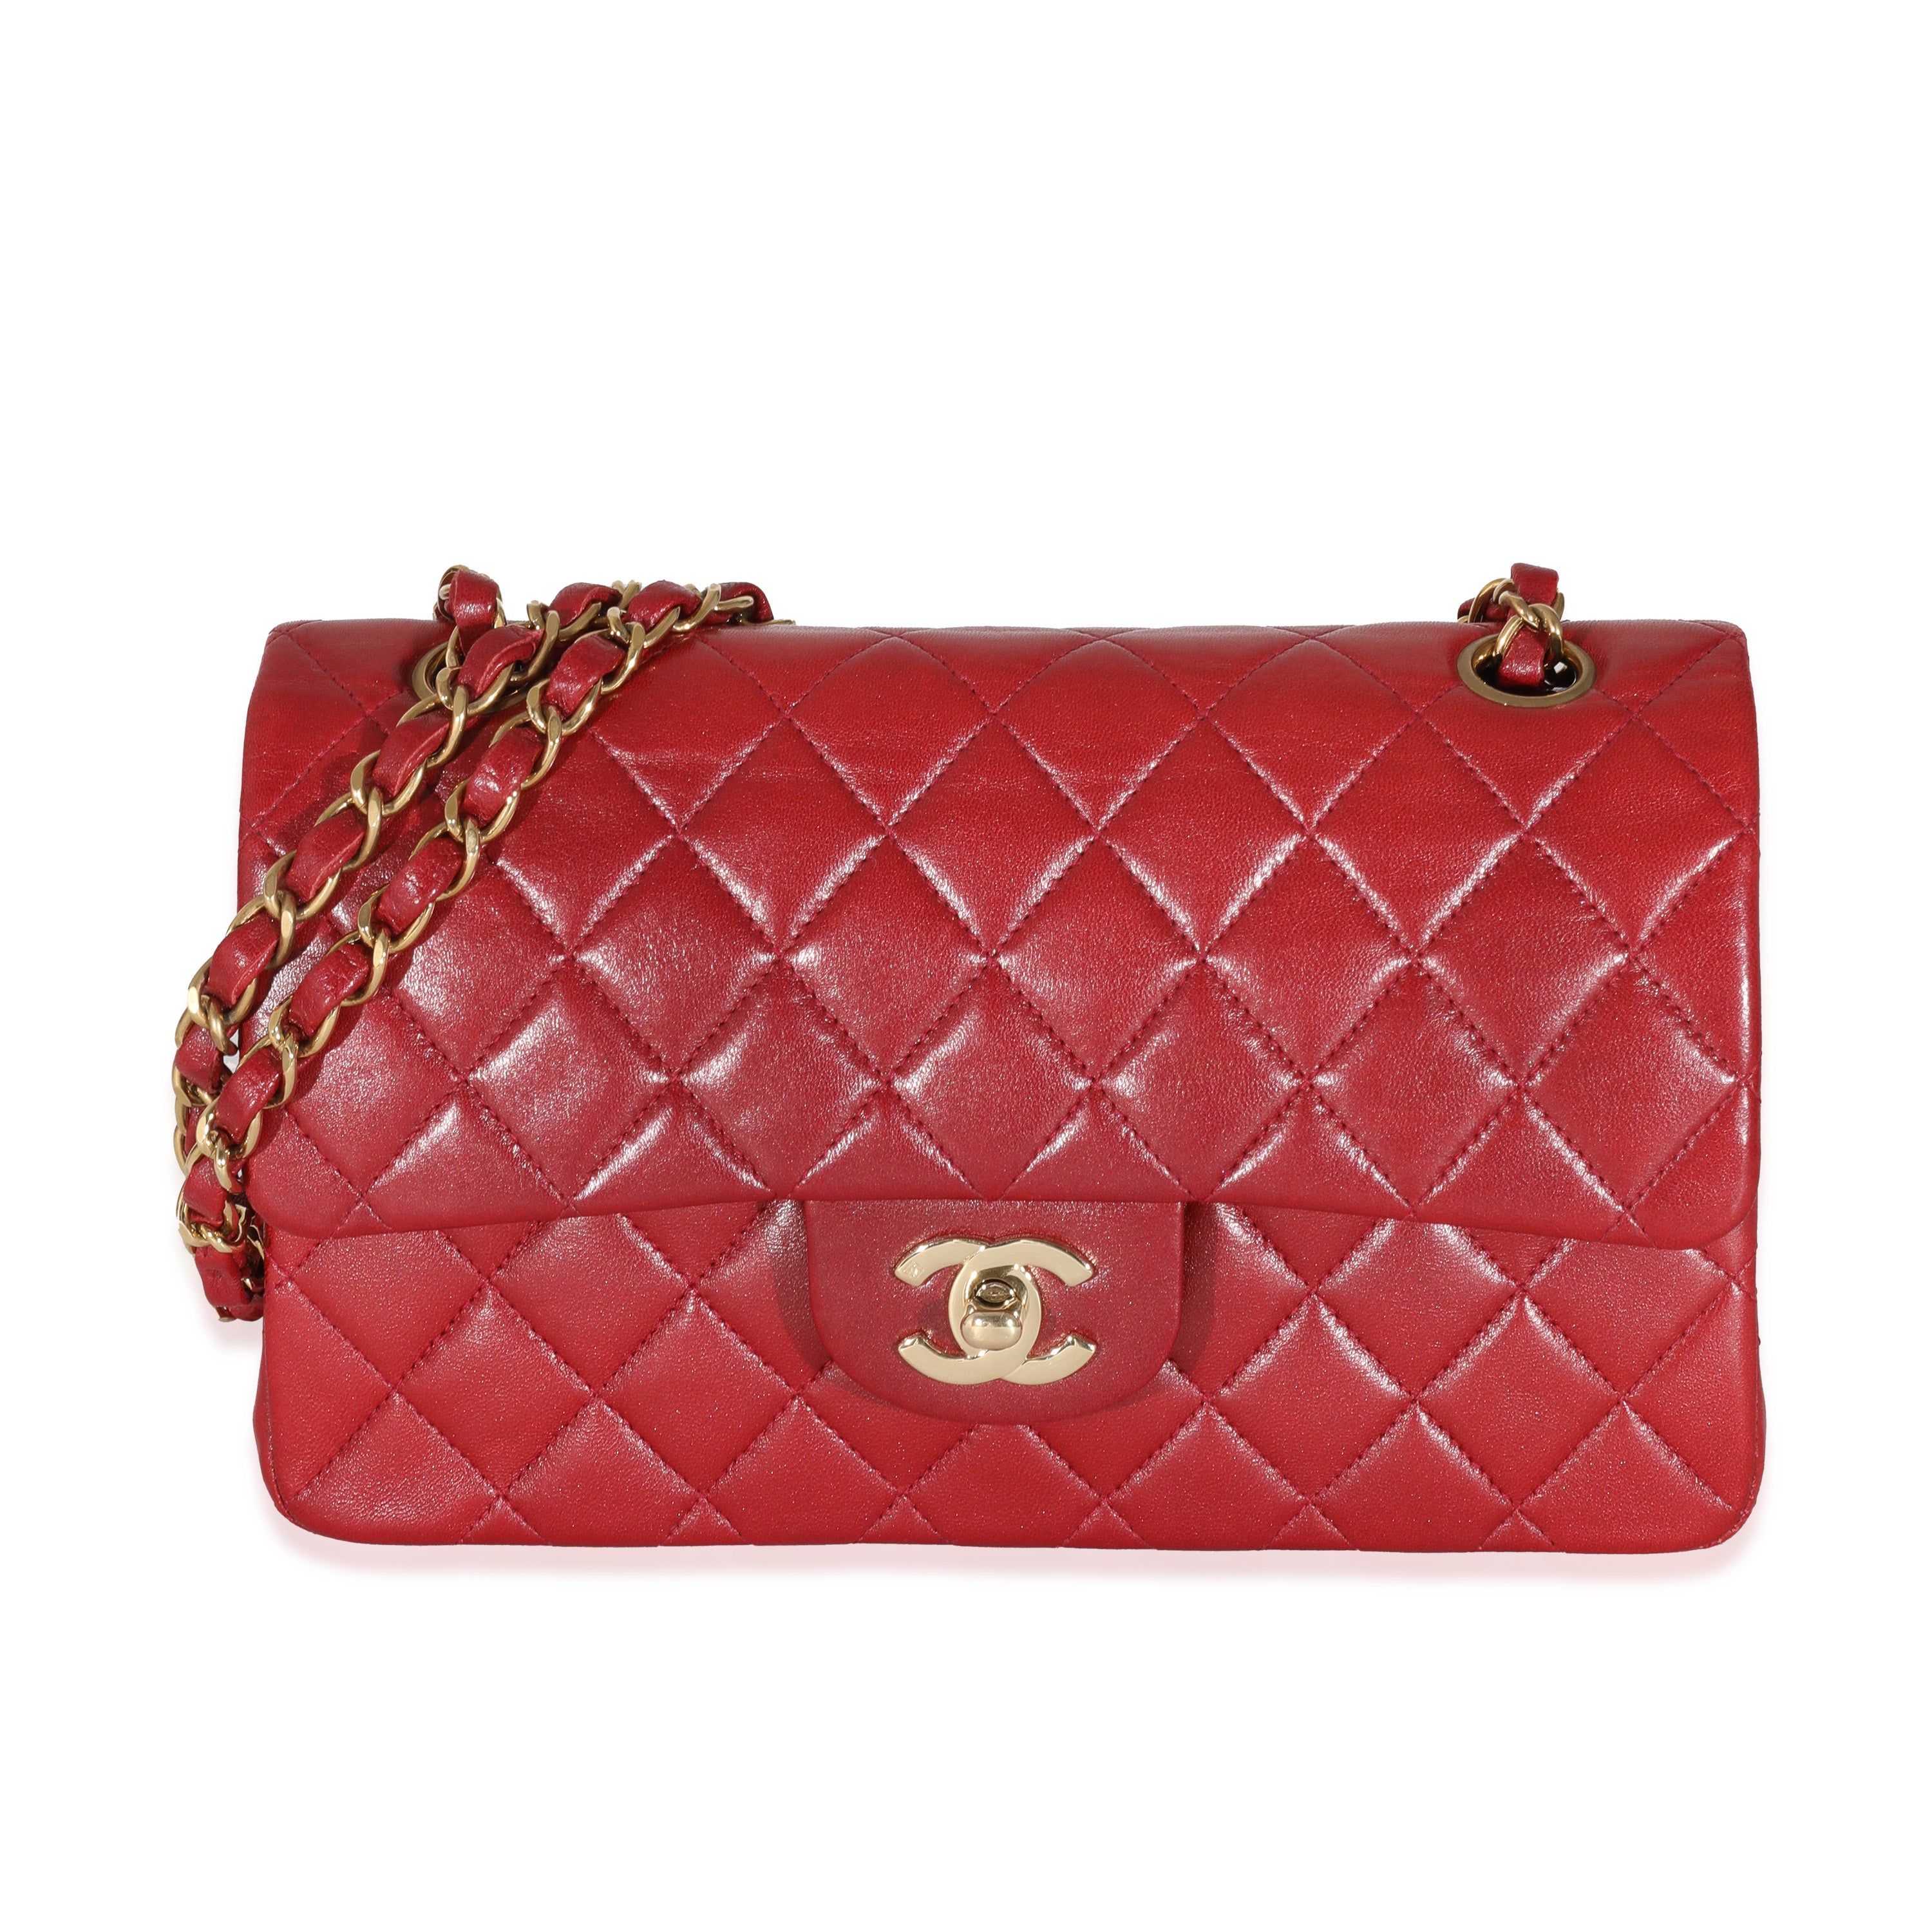 Chanel Vintage 24k Red Quilted Lambskin Small Classic Double Flap Bag, myGemma, DE